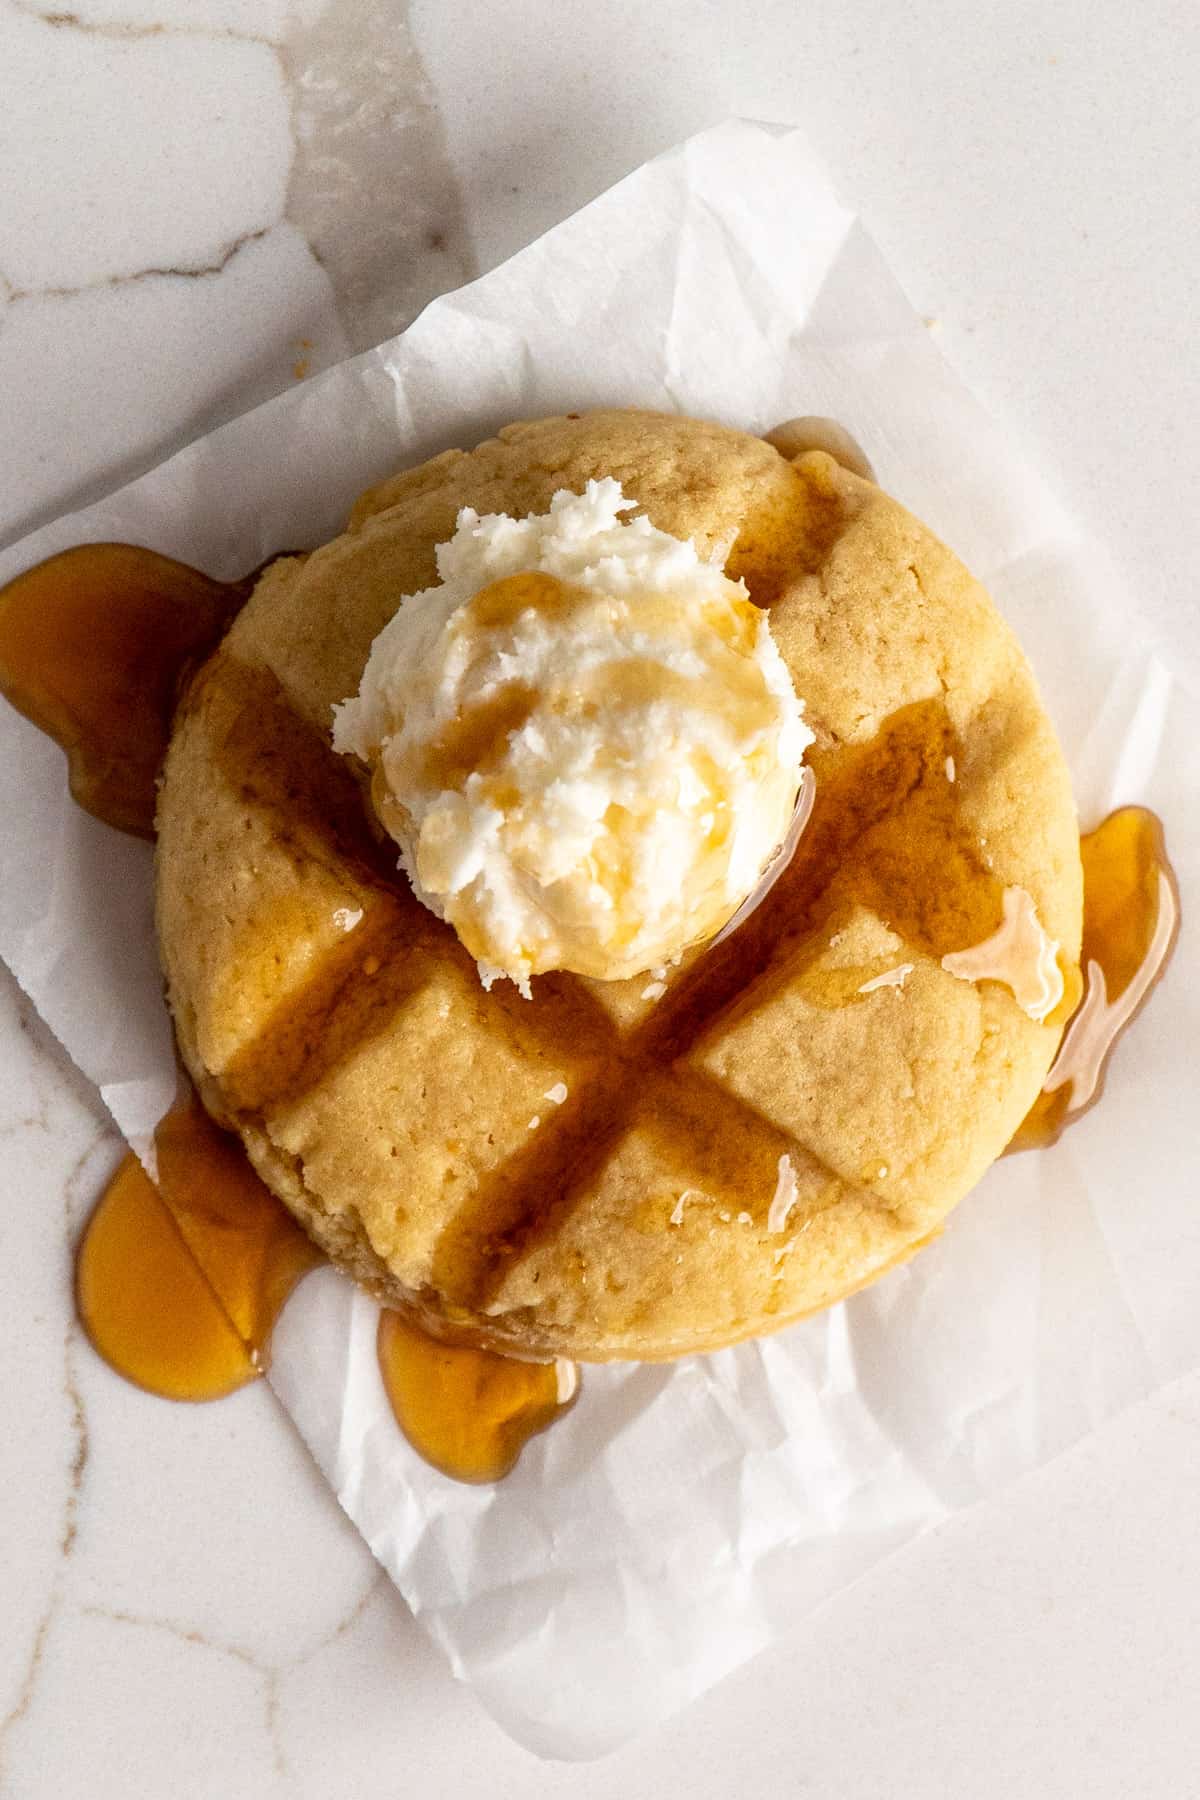 A Crumbl waffle cookie with syrup on it.